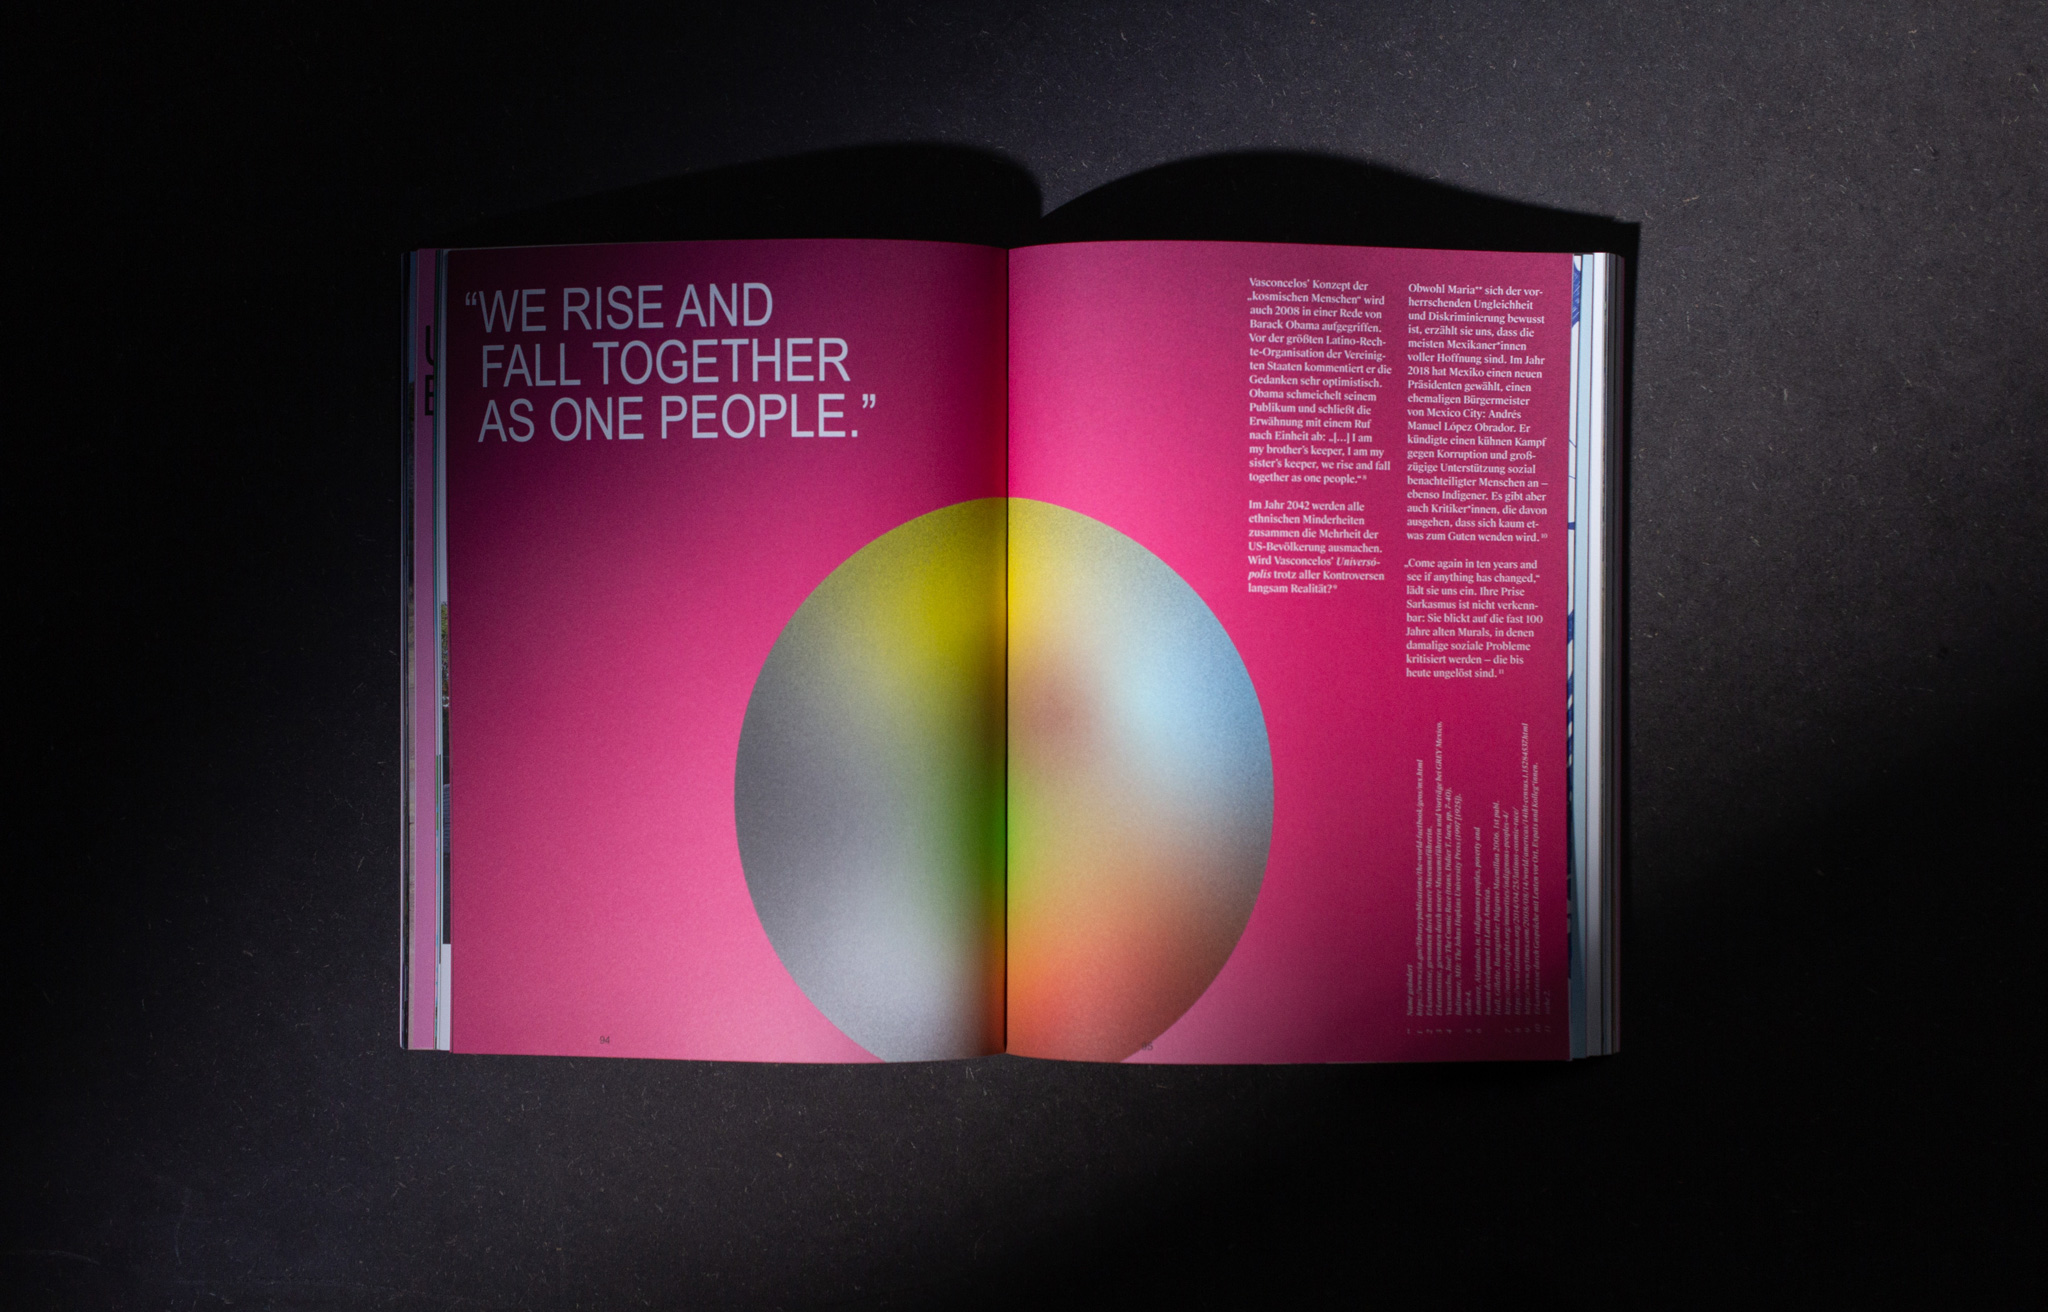 “We rise and fall together as one people.” — fourth spread